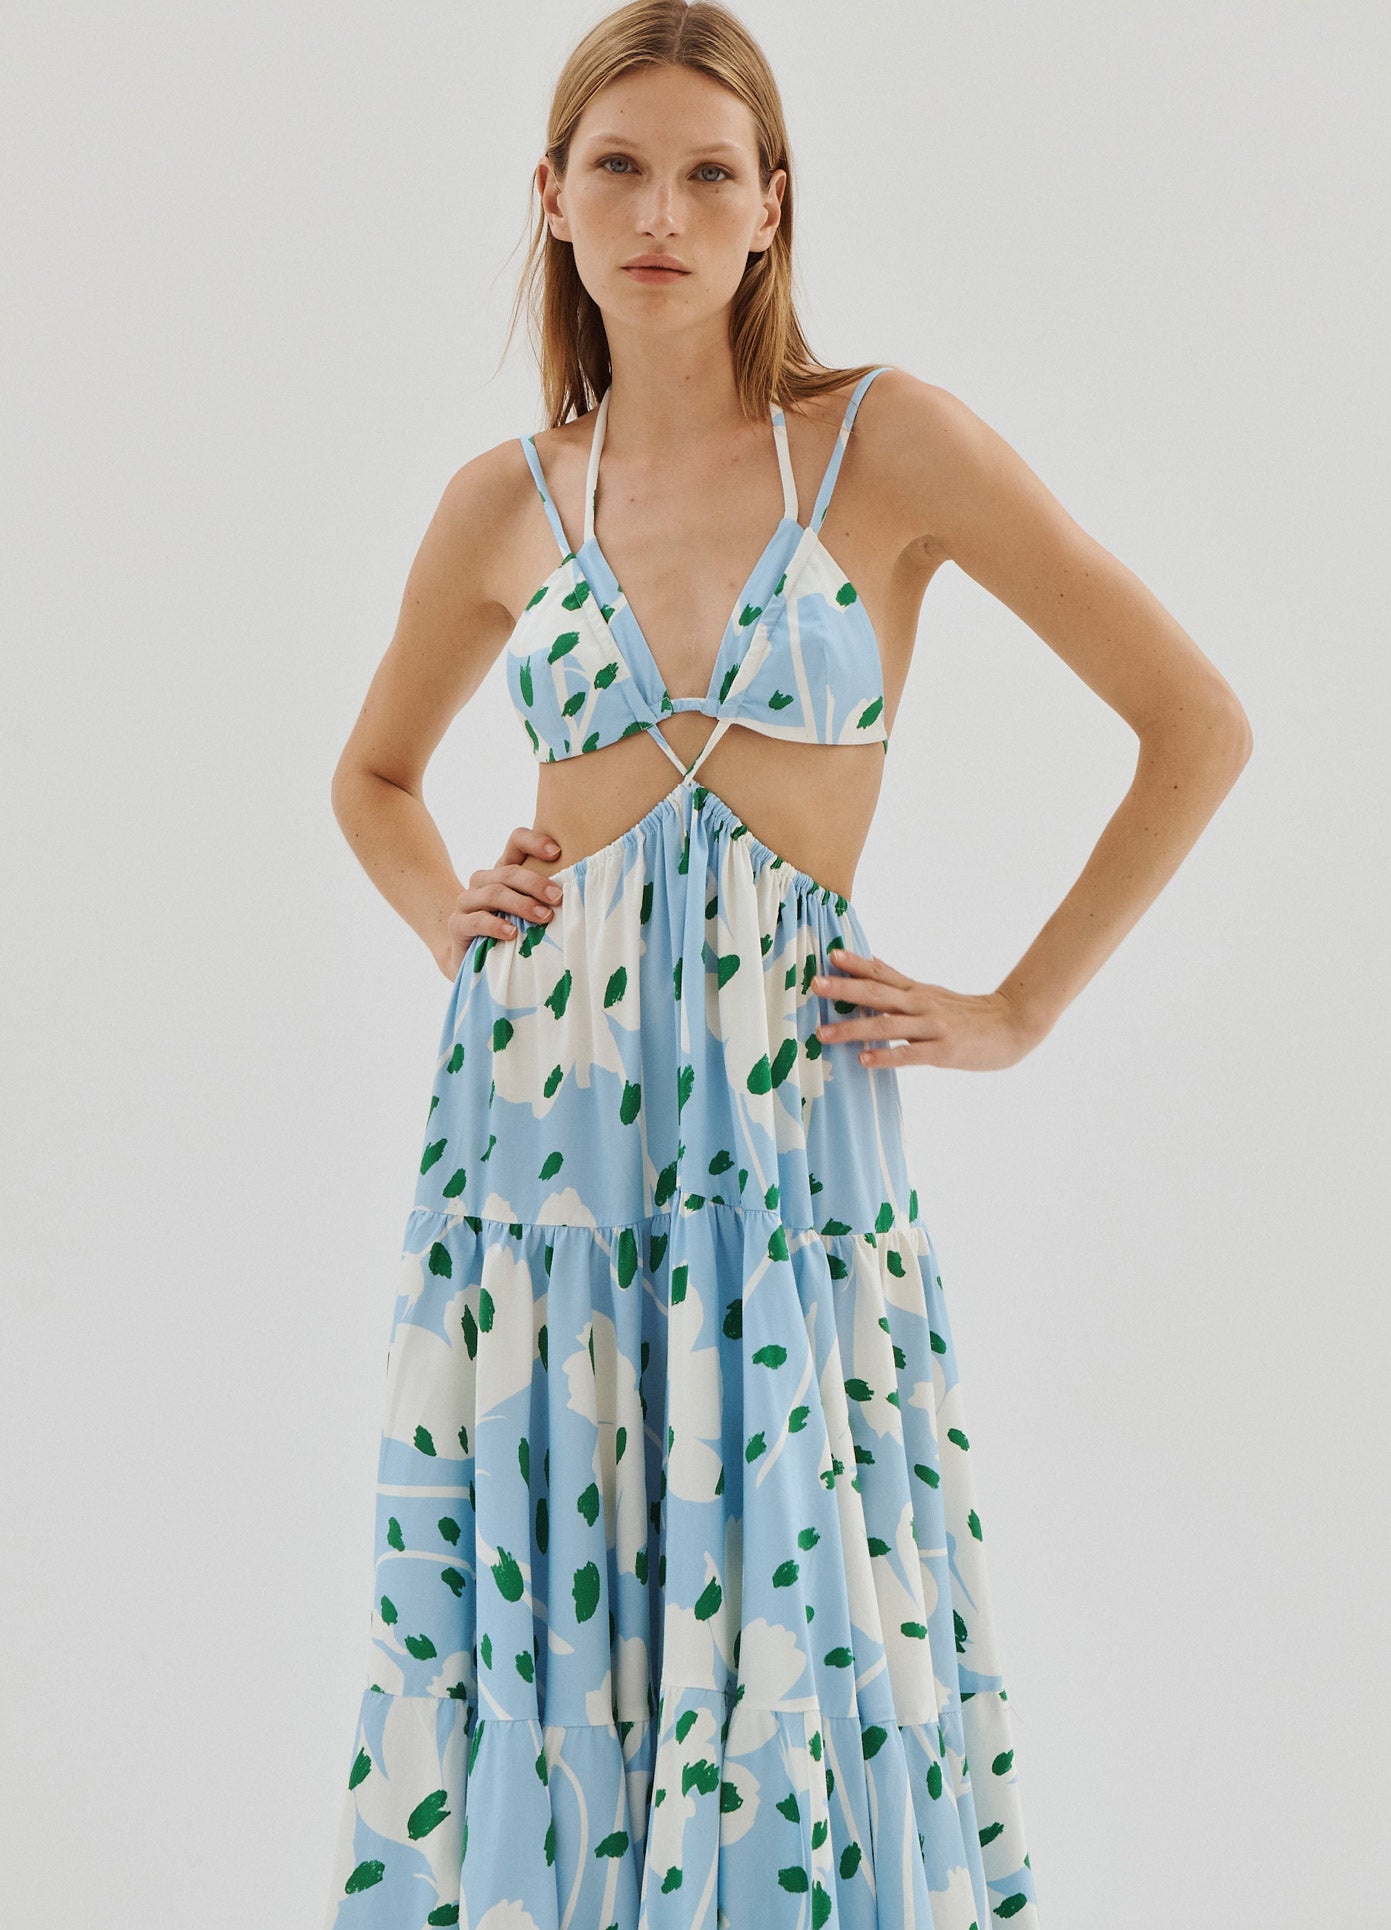 MONSE Floral Print Bra Detail Maxi Dress in Light Blue Multi on Model with Hands on Hips Front View